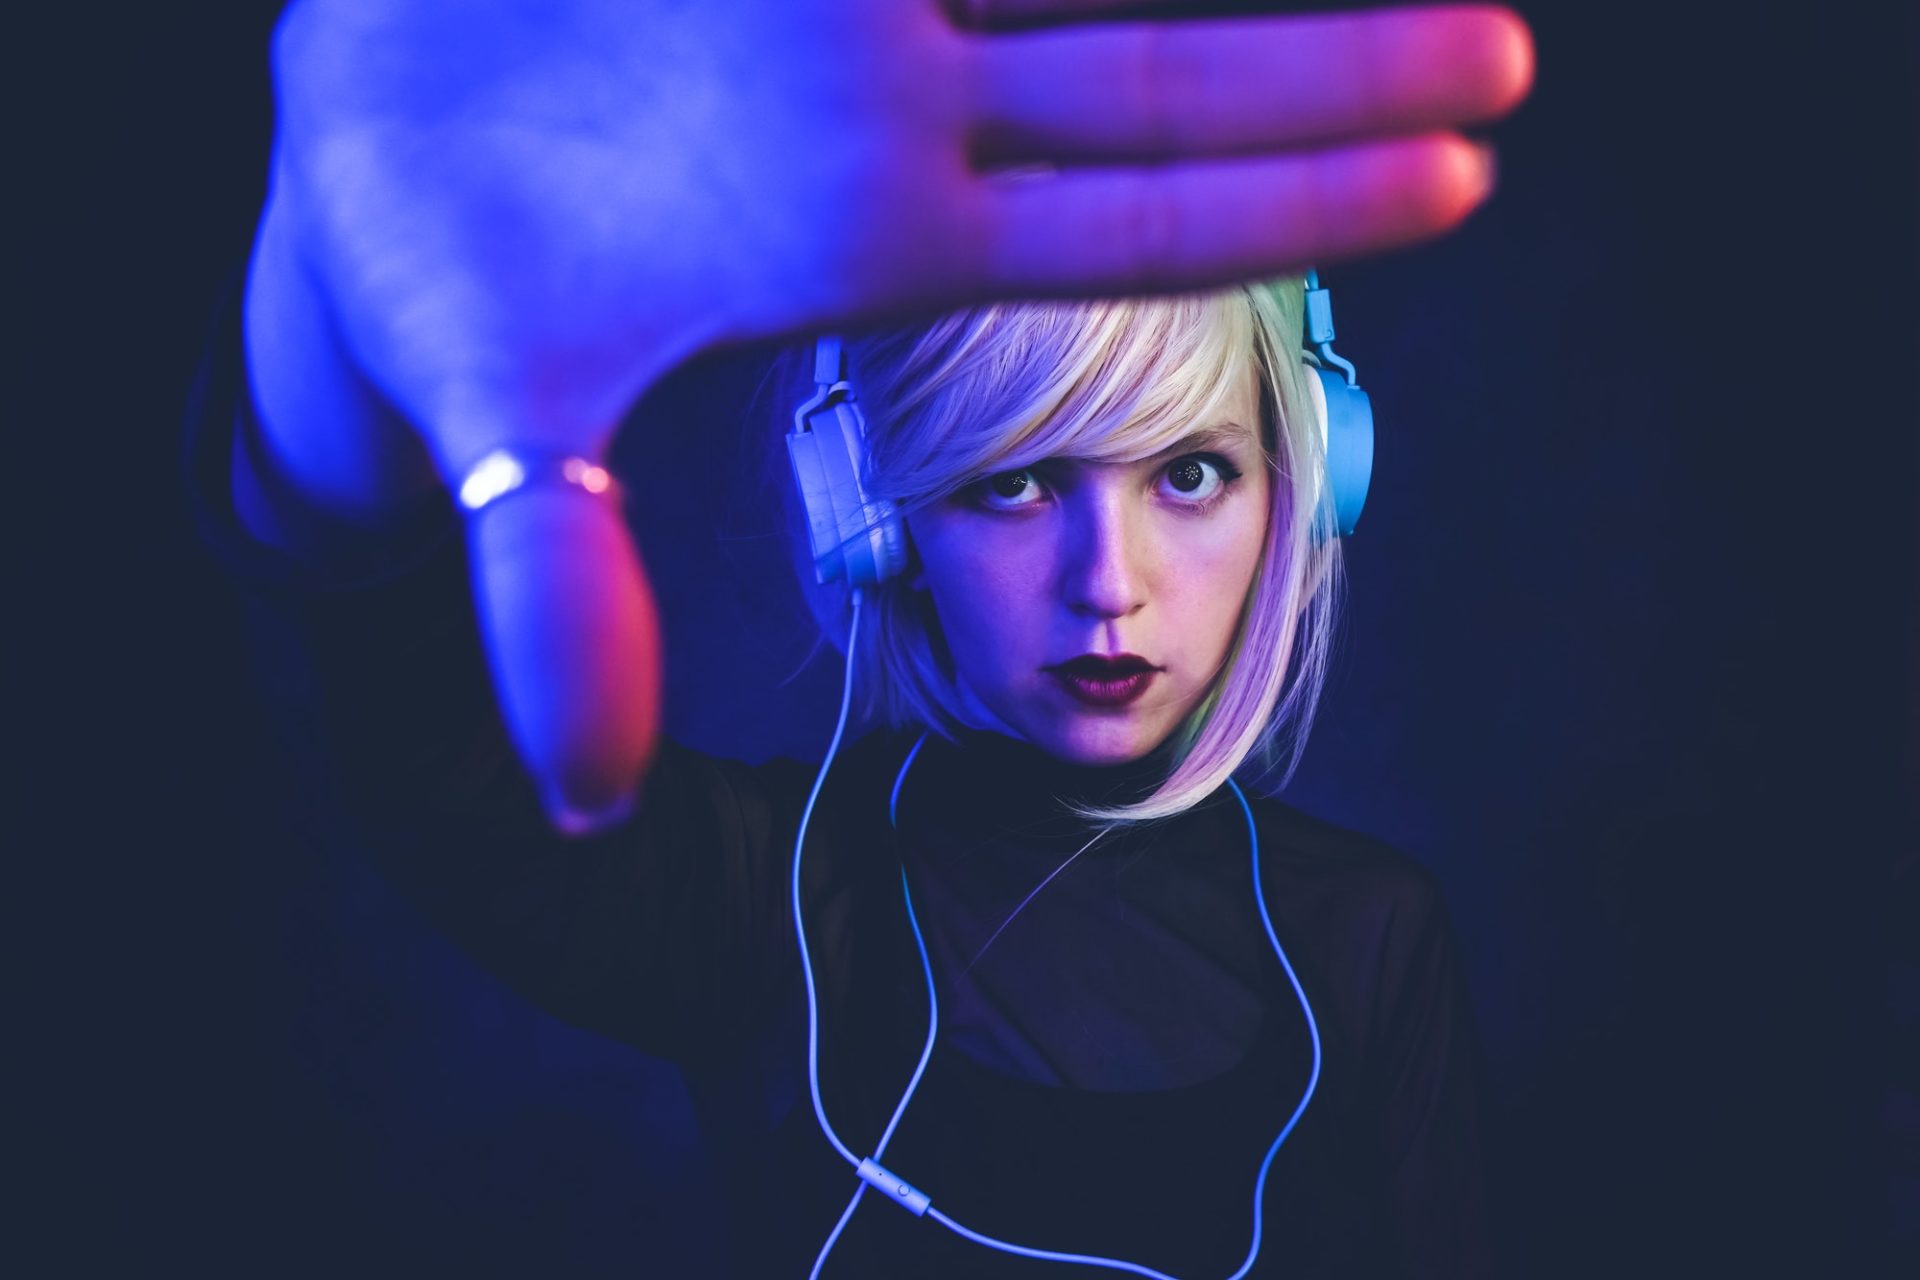 Young woman listening to music and illuminated by neon lights